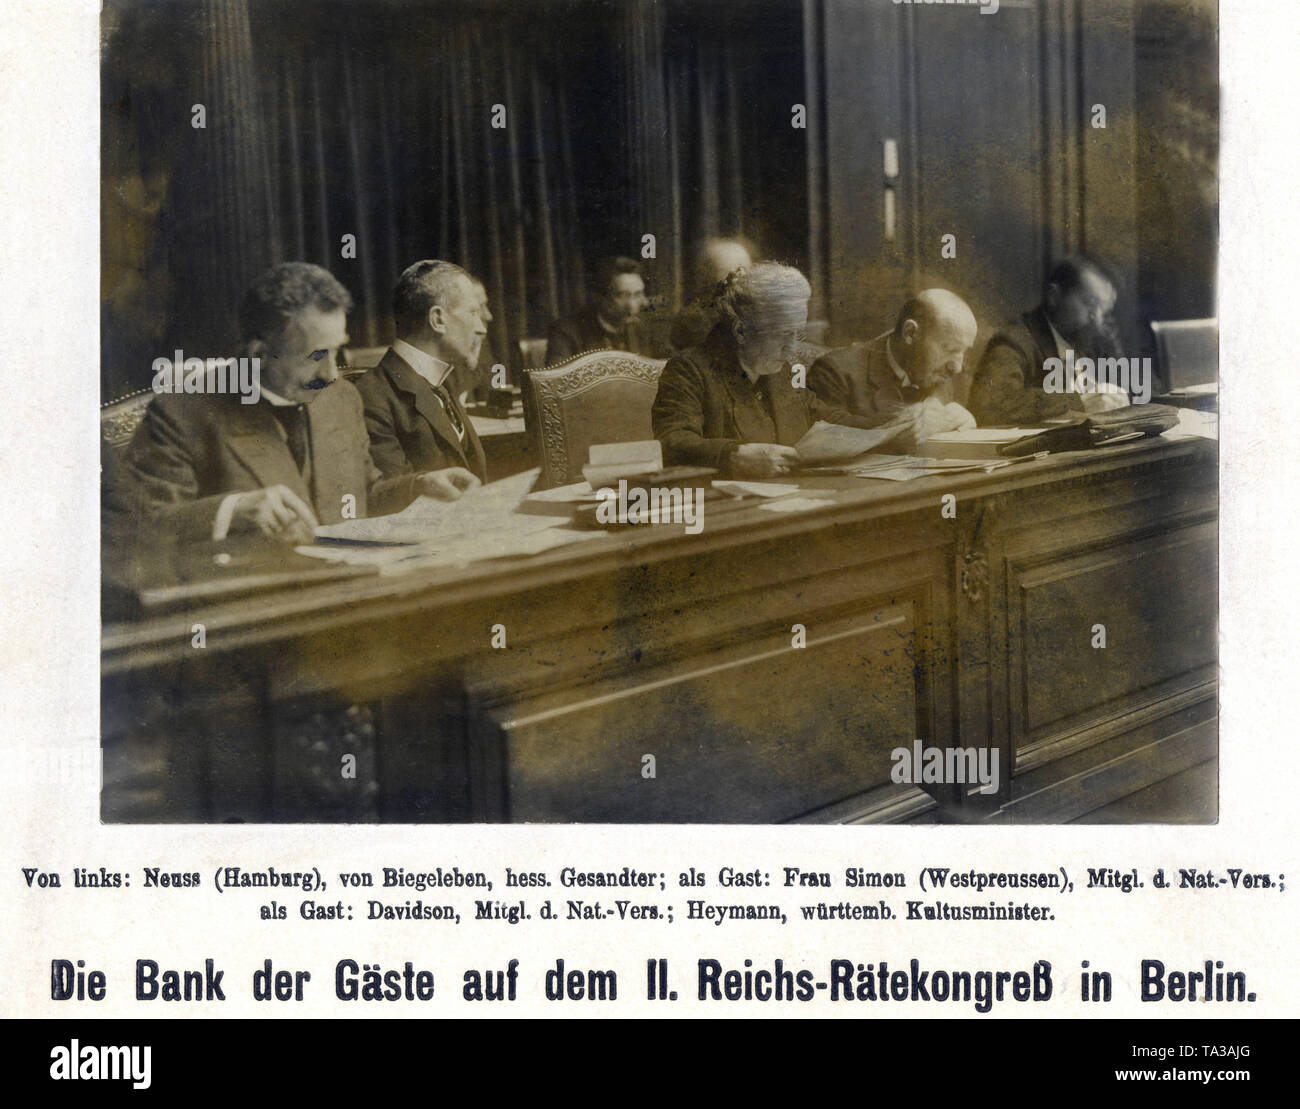 Second session of the Reichsraetekongress (Imperial Council Congress) in the Herrenhaus. From left, Neuss, the Hessian envoy Max von Biegeleben, Member of the German National Assembly Anna Simon, Davidson as a guest member of the German National Assembly, Heymann, Minister of Culture of Wuerttemberg. Stock Photo